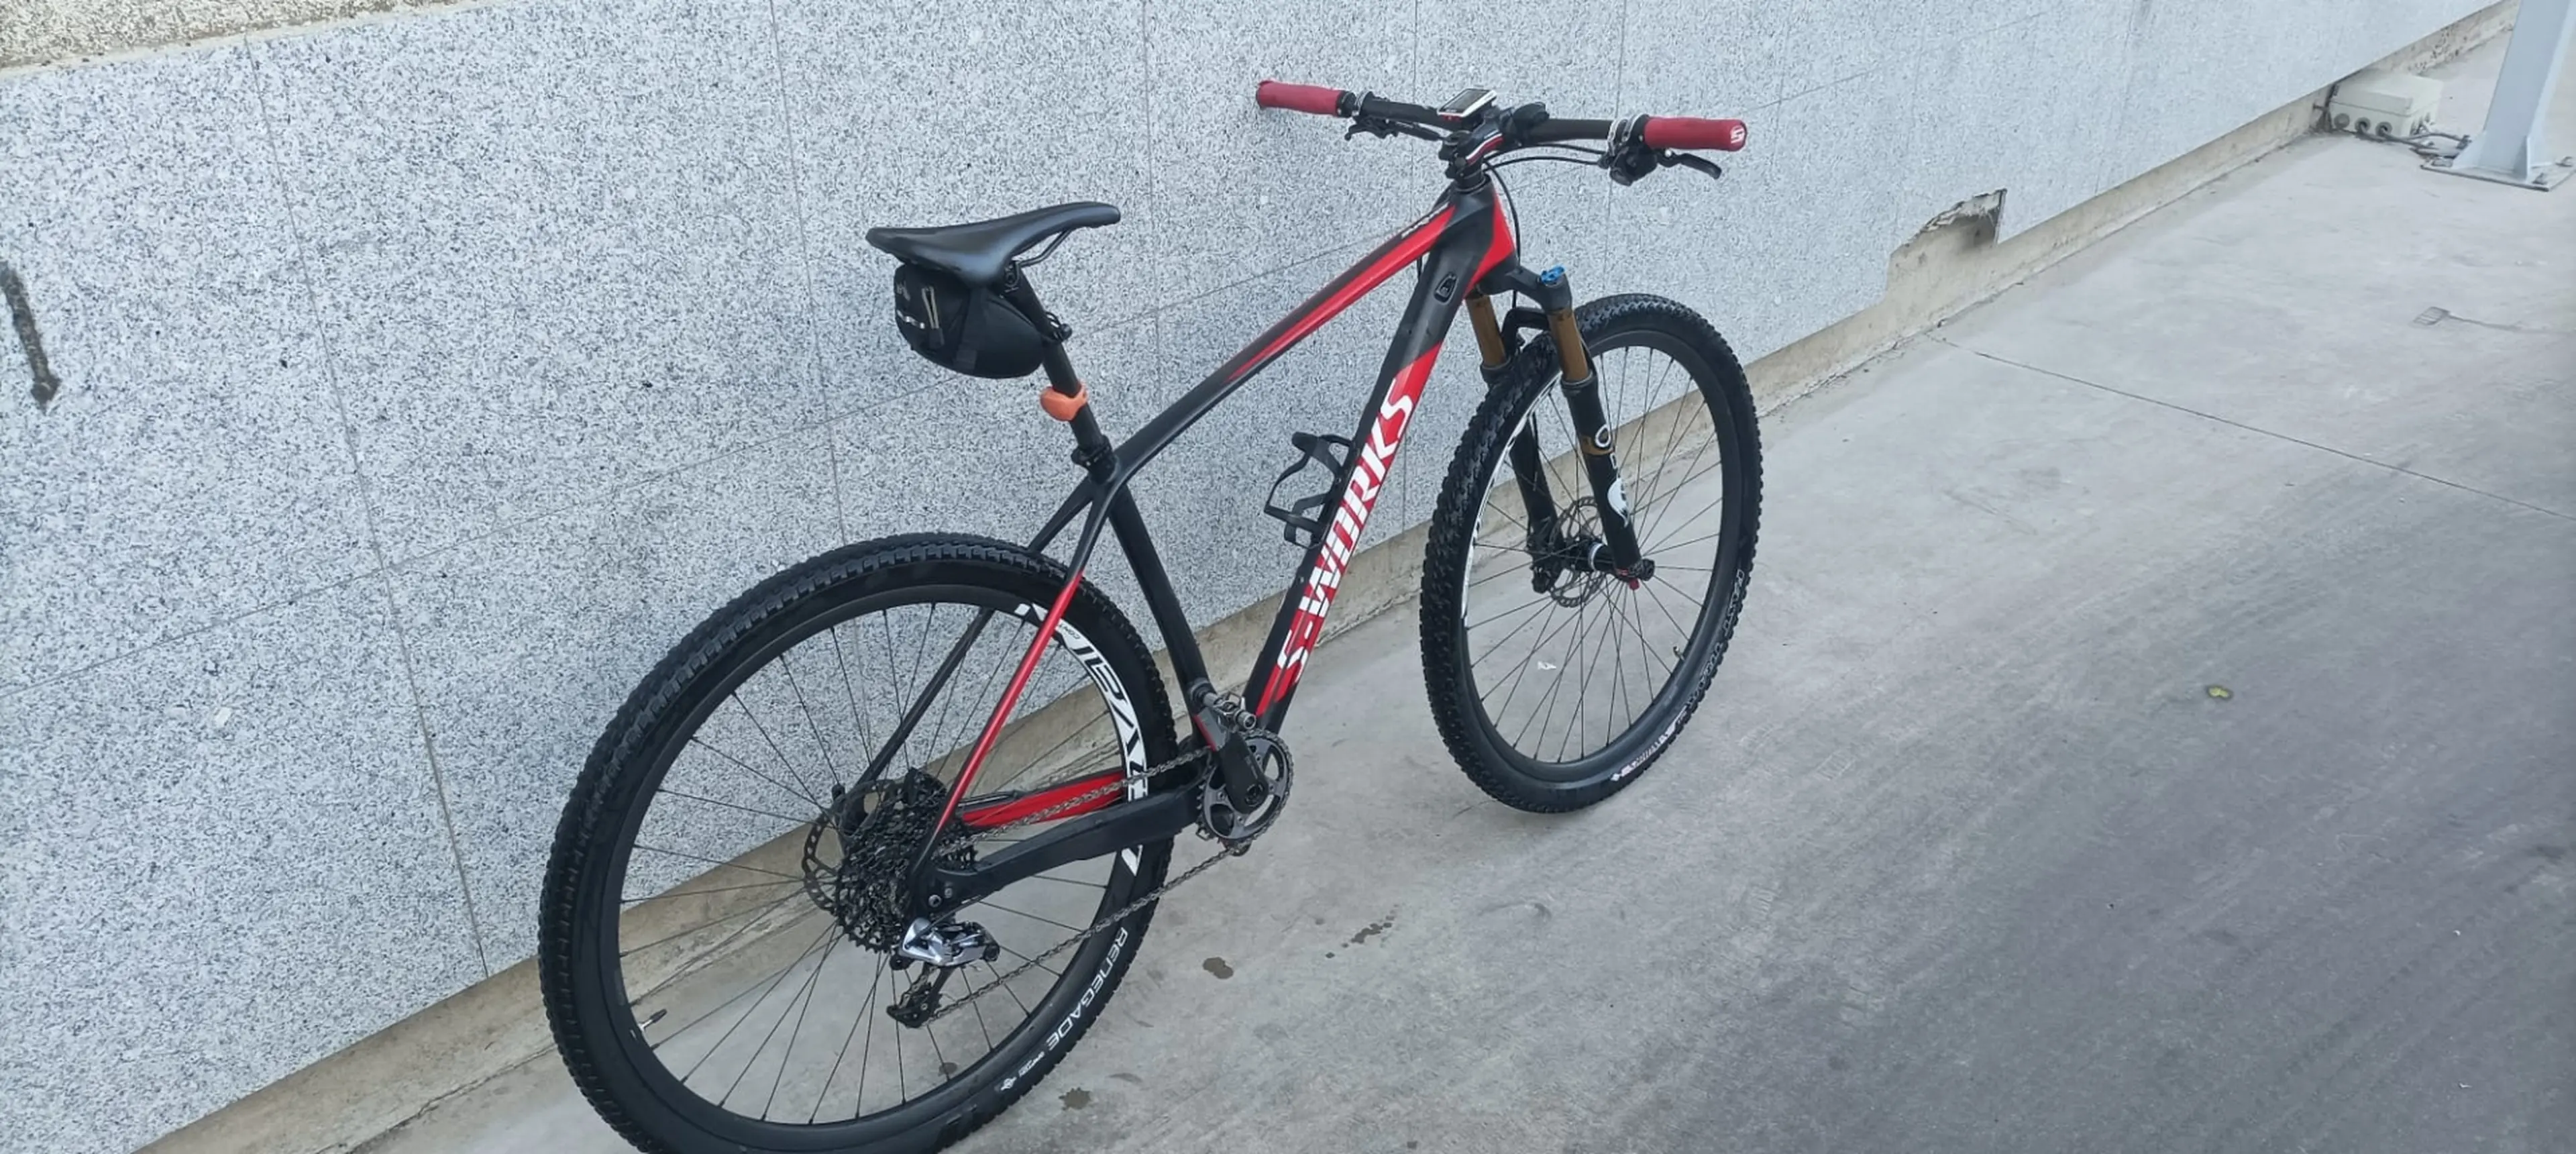 2. Specialized stumpjumper S-Works